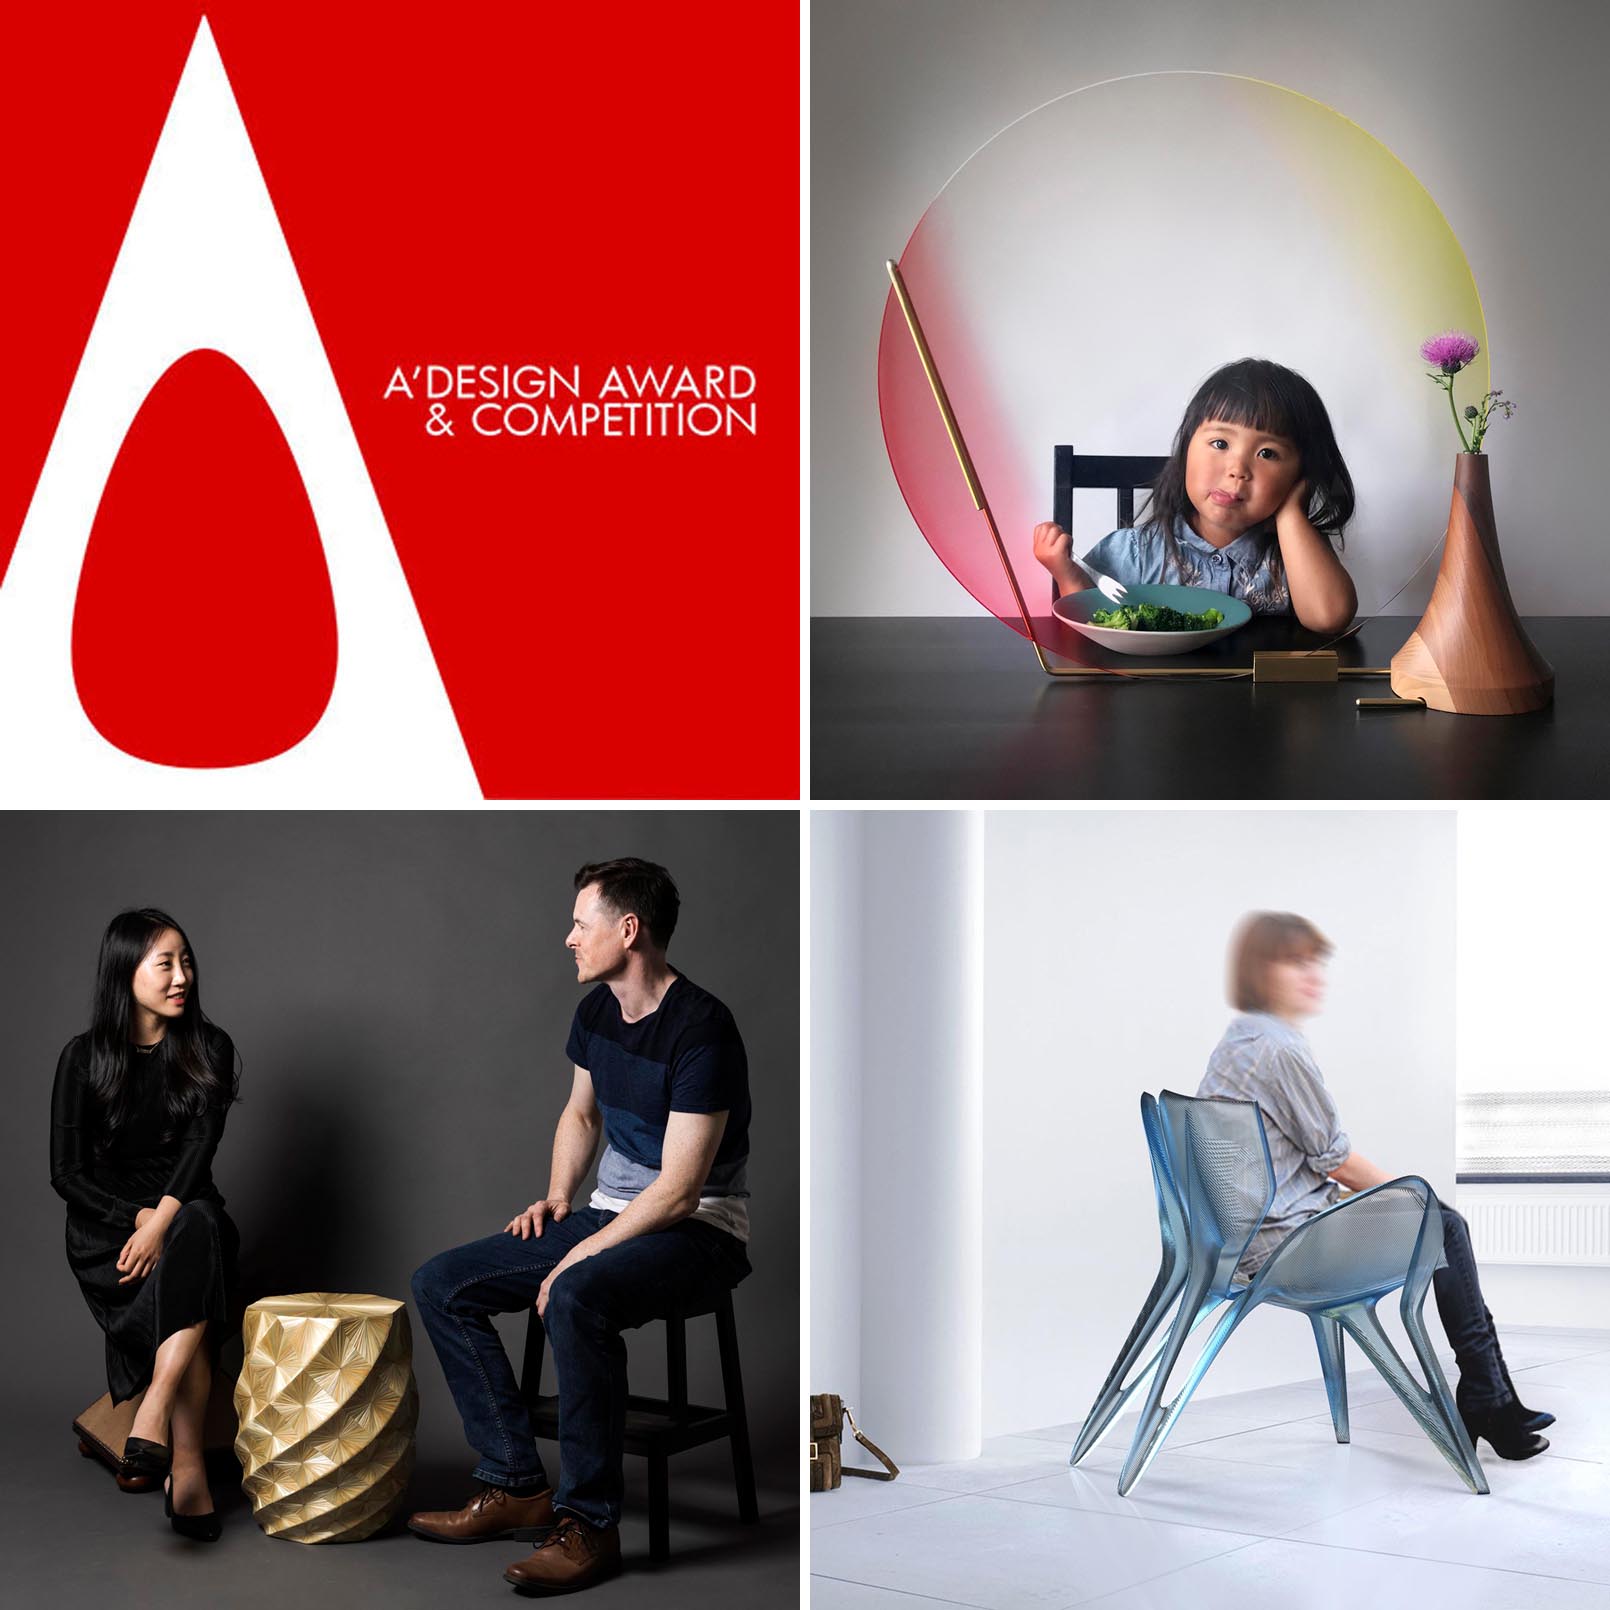 A’ Design Award & Competition is the Worlds’ leading design accolade reaching design enthusiasts around the world.